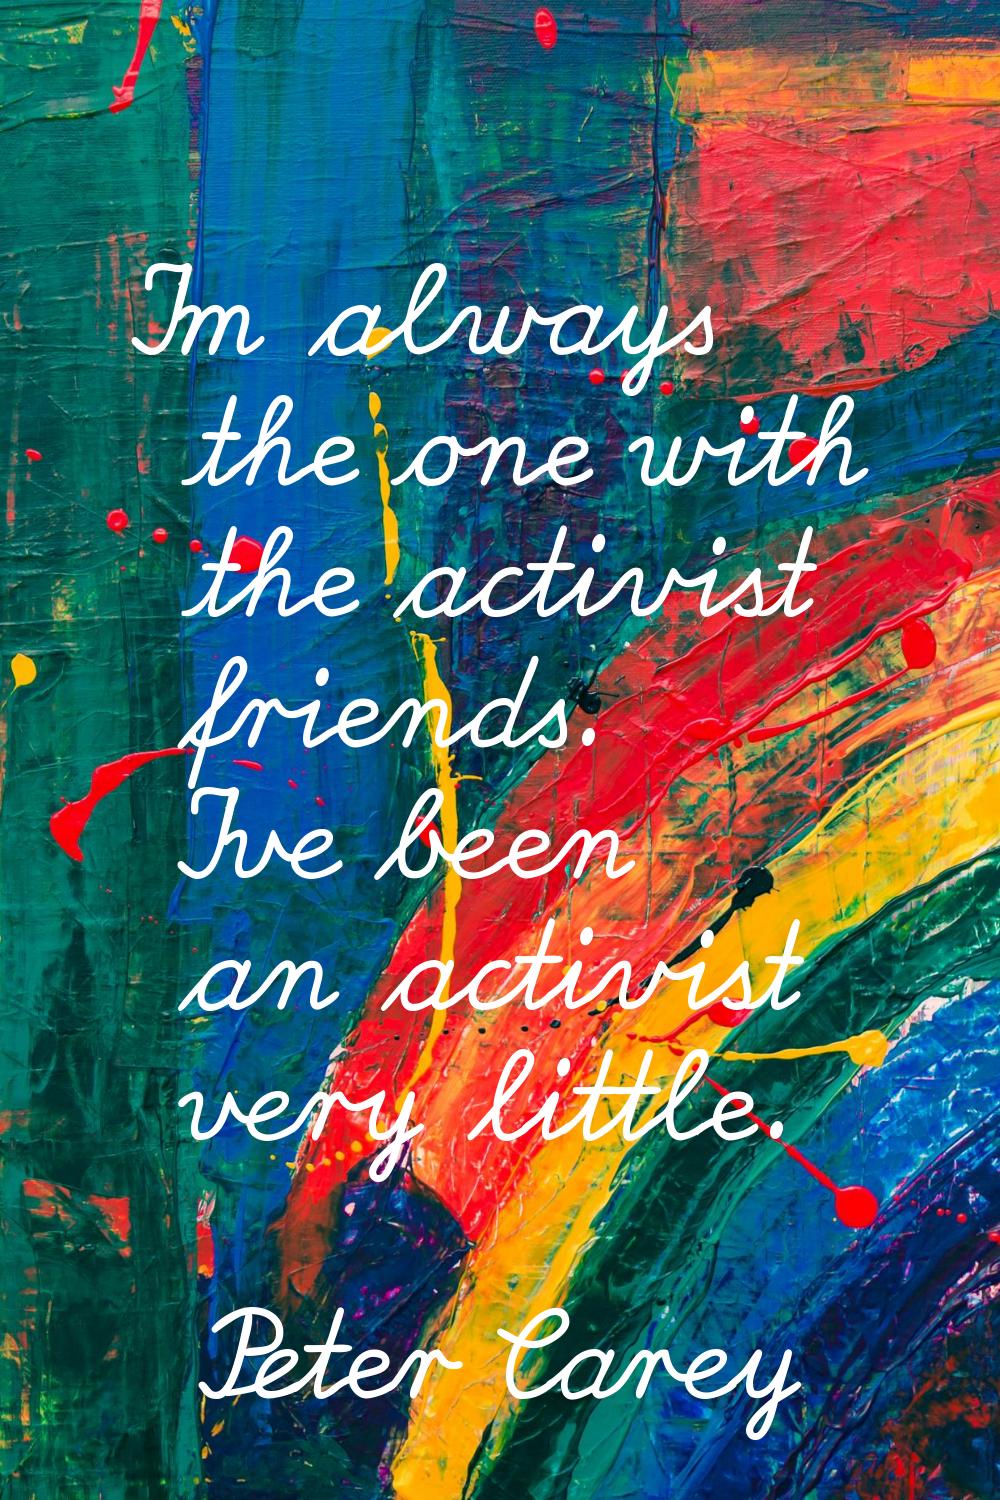 I'm always the one with the activist friends. I've been an activist very little.